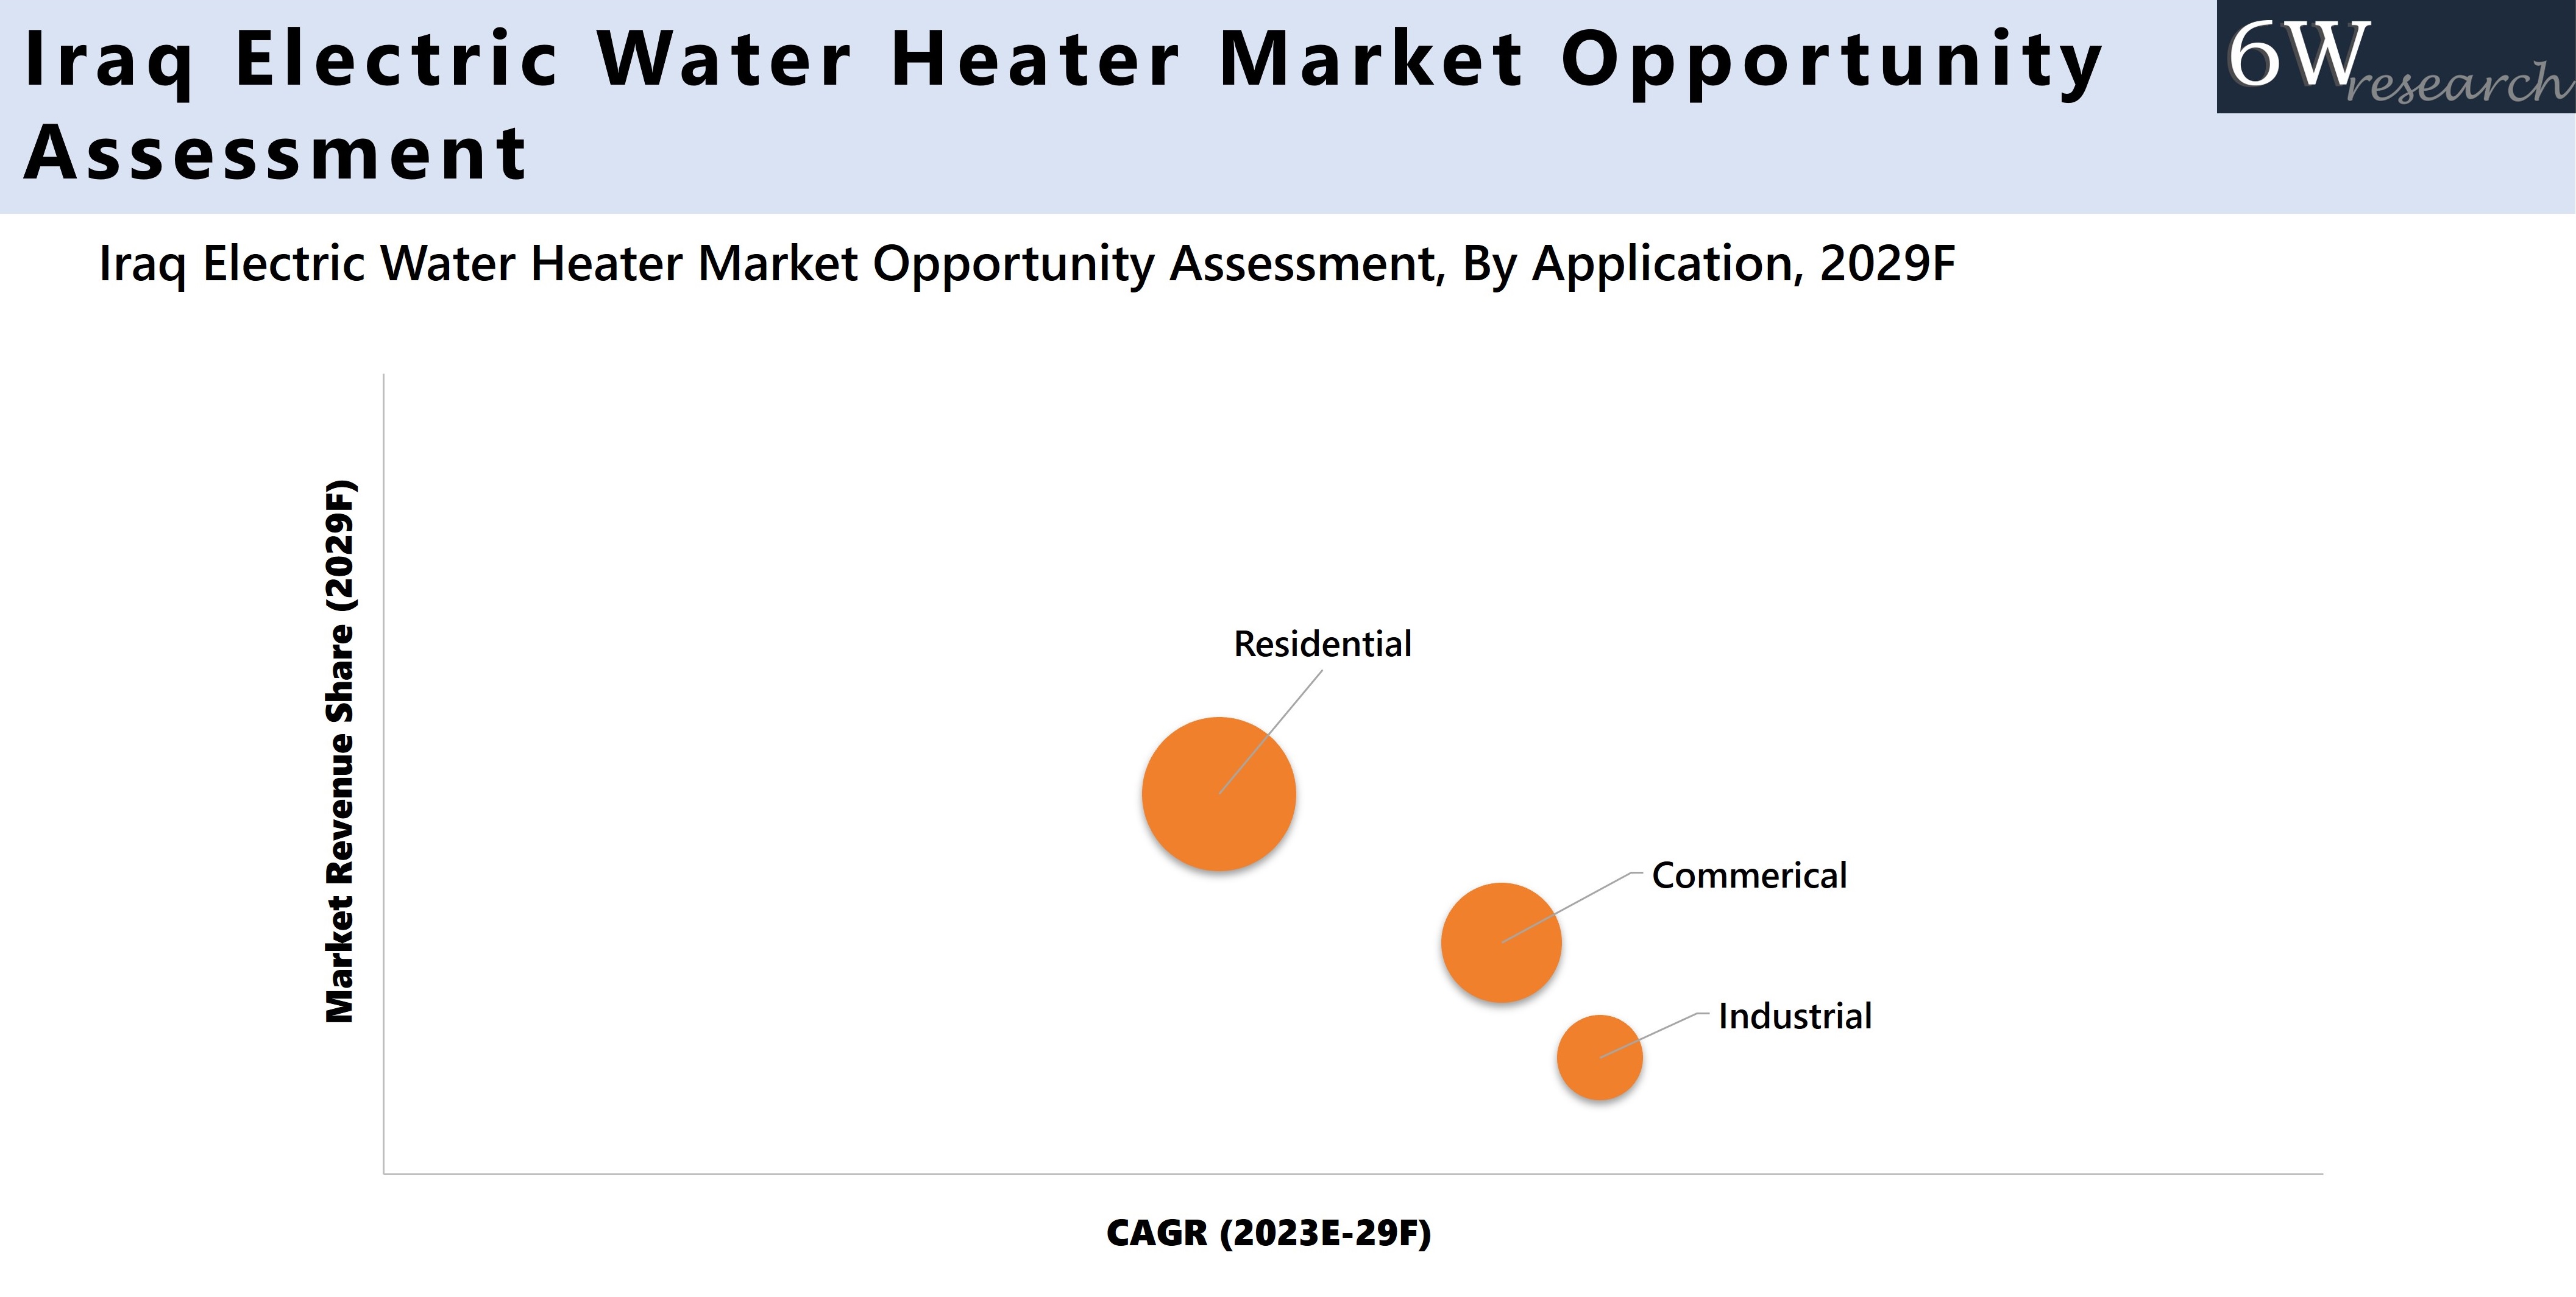 Iraq Electric Water Heater Market Opportunity Assessment